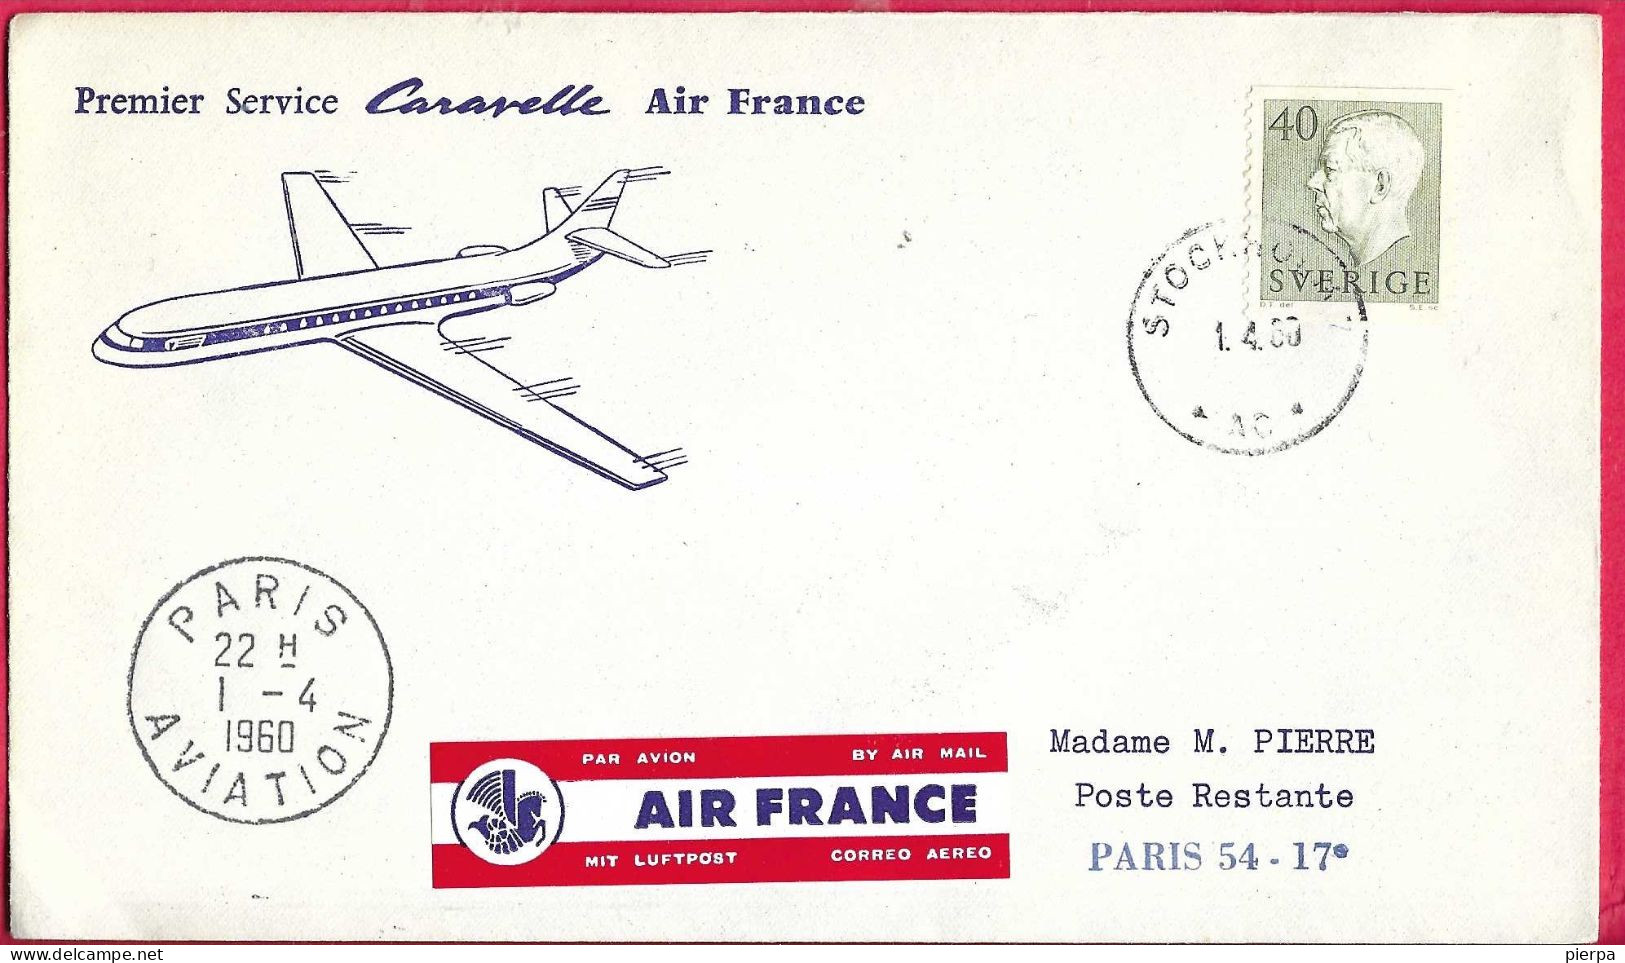 SVERIGE - FIRST CARAVELLE FLIGHT AIR FRANCE FROM STOCKHOLM TO PARIS *1.4.1960* ON OFFICIAL COVER - Covers & Documents